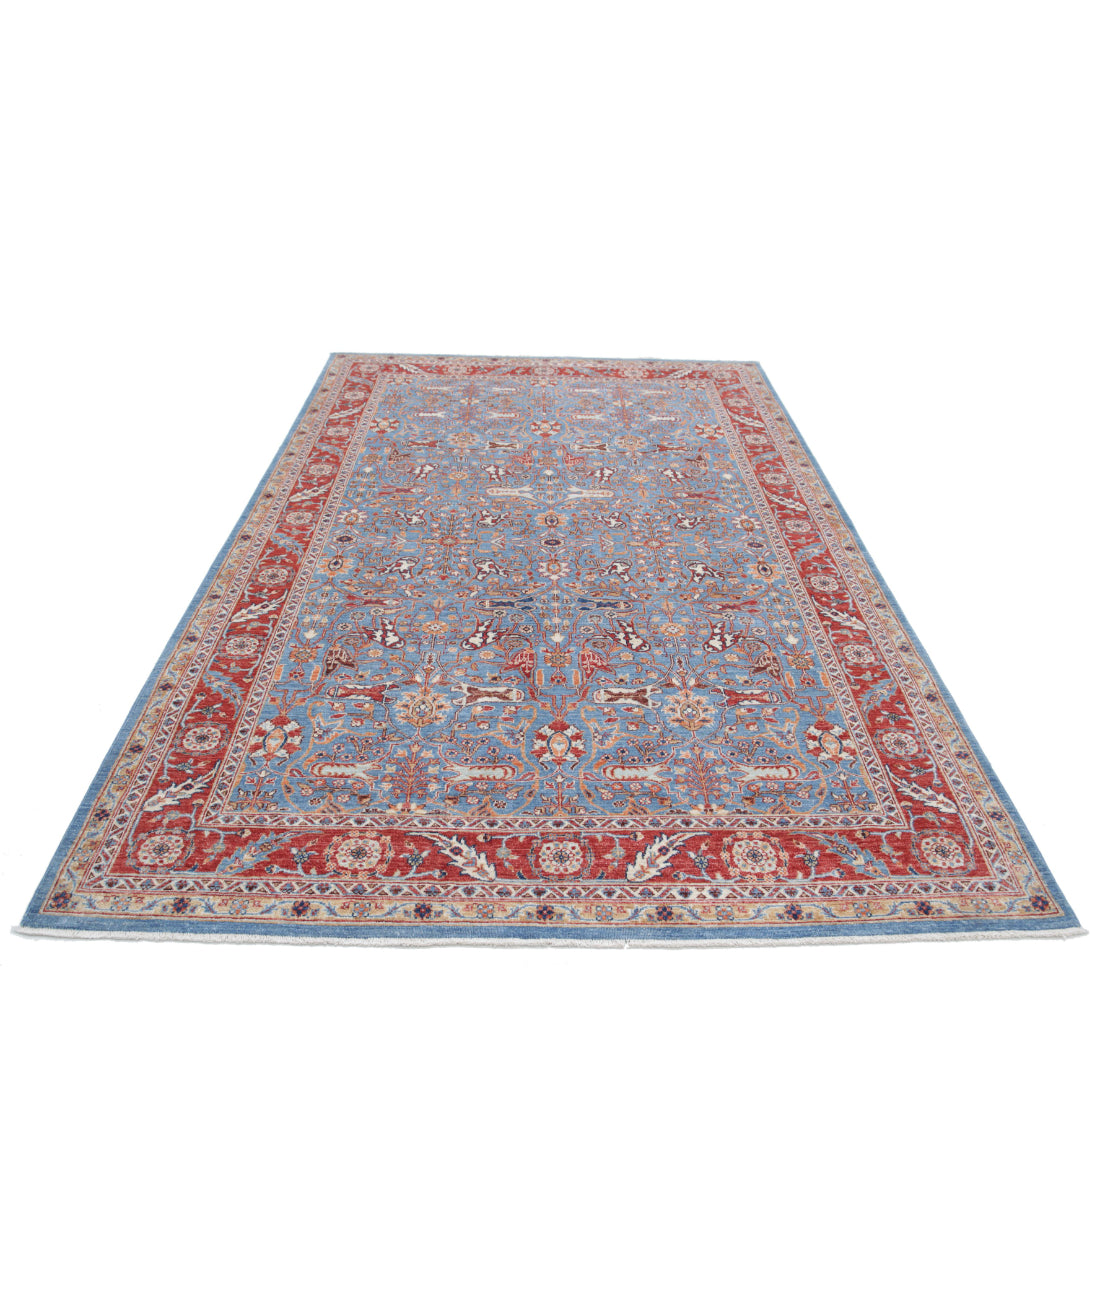 Ziegler 6'4'' X 9'10'' Hand-Knotted Wool Rug 6'4'' x 9'10'' (190 X 295) / Blue / Red